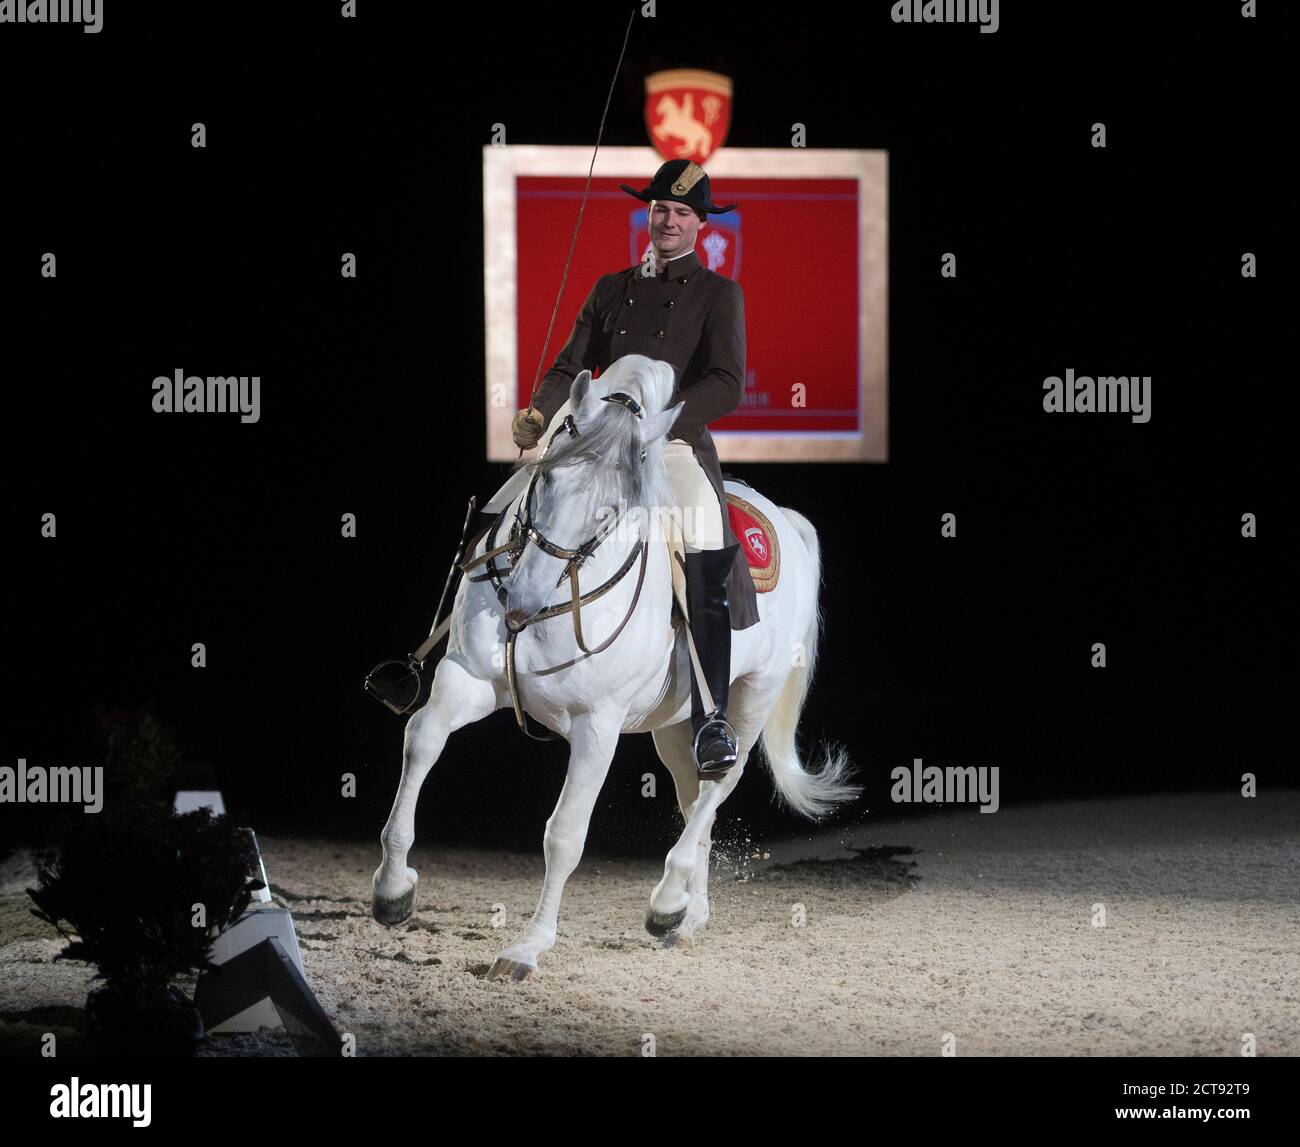 THE SPANISH RIDING SCHOOL PERFORM AT THE WEMBLEY ARENA, LONDON.   PHOTO CREDIT :  © MARK PAIN / ALAMY STOCK PHOTO Stock Photo